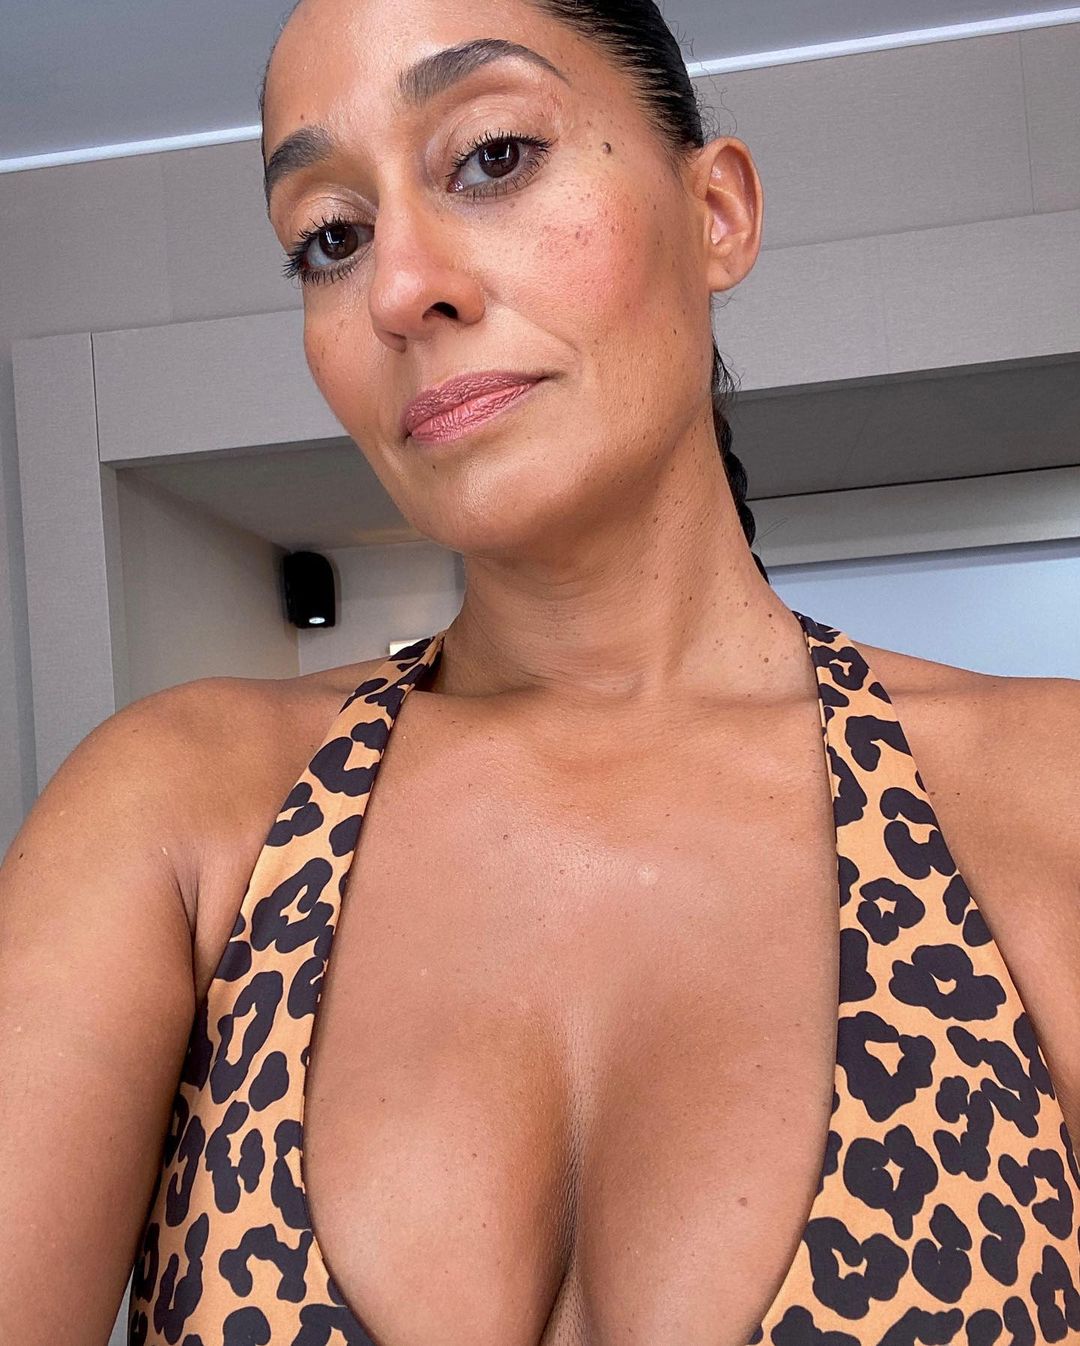 Photos n ° 1 : Tracee Ellis Ross Thirst Trapping Now and Then! 